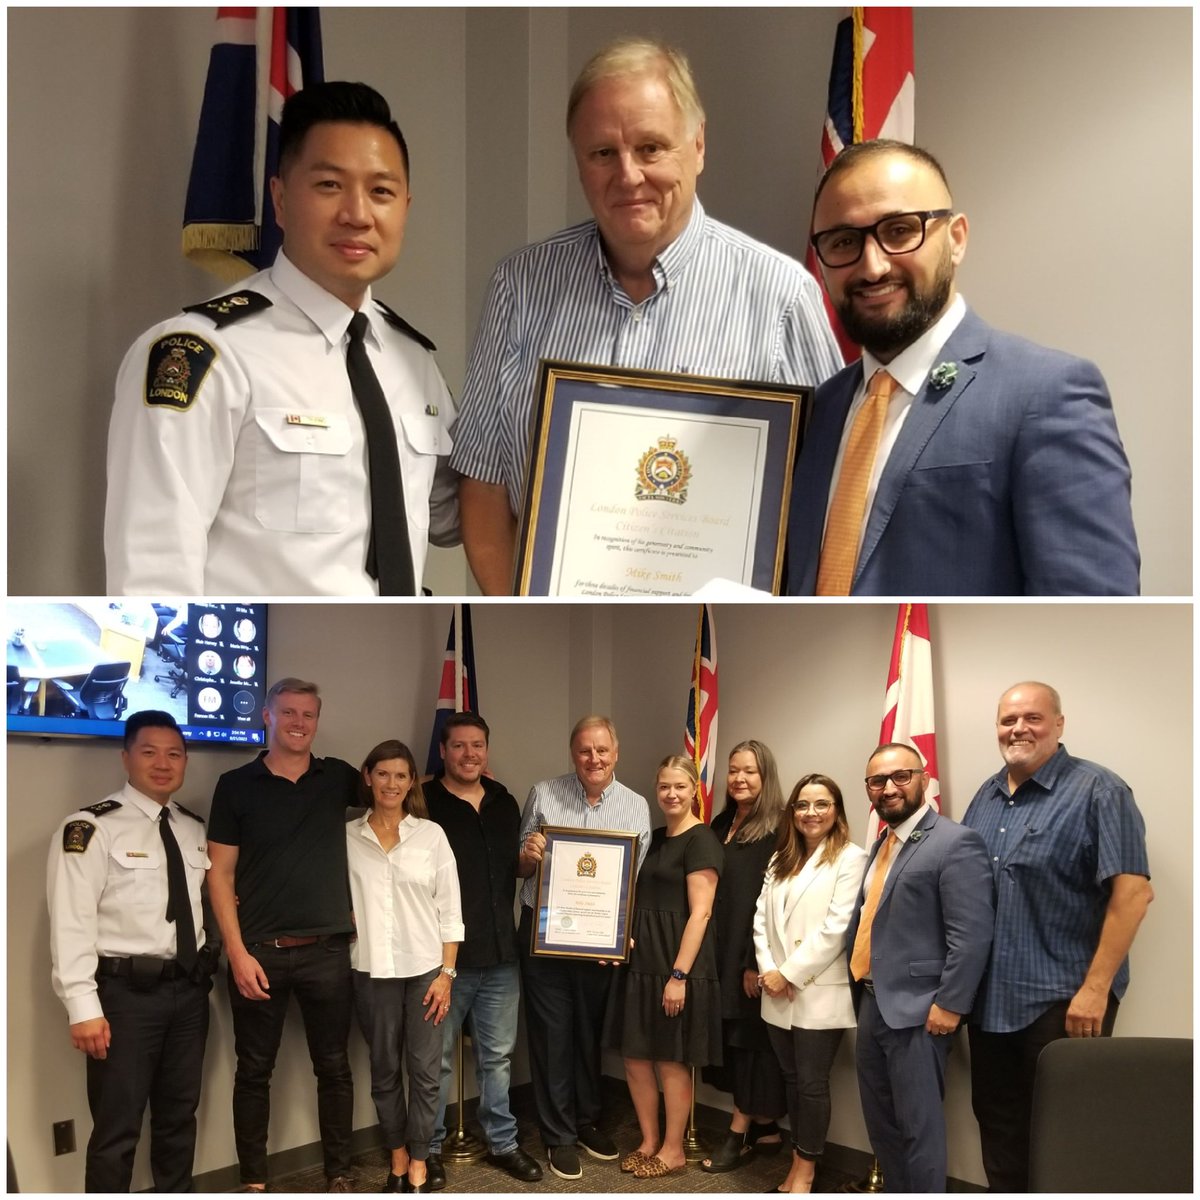 Today we presented an LPSB Citizen Citation to Mike Smith & Team @joekoolslondon for their financial & social support of LPS Rookie League Baseball & many other initiatives supporting at risk youth in #ldnont. You make our community a better place! #communitylove #reallifehero